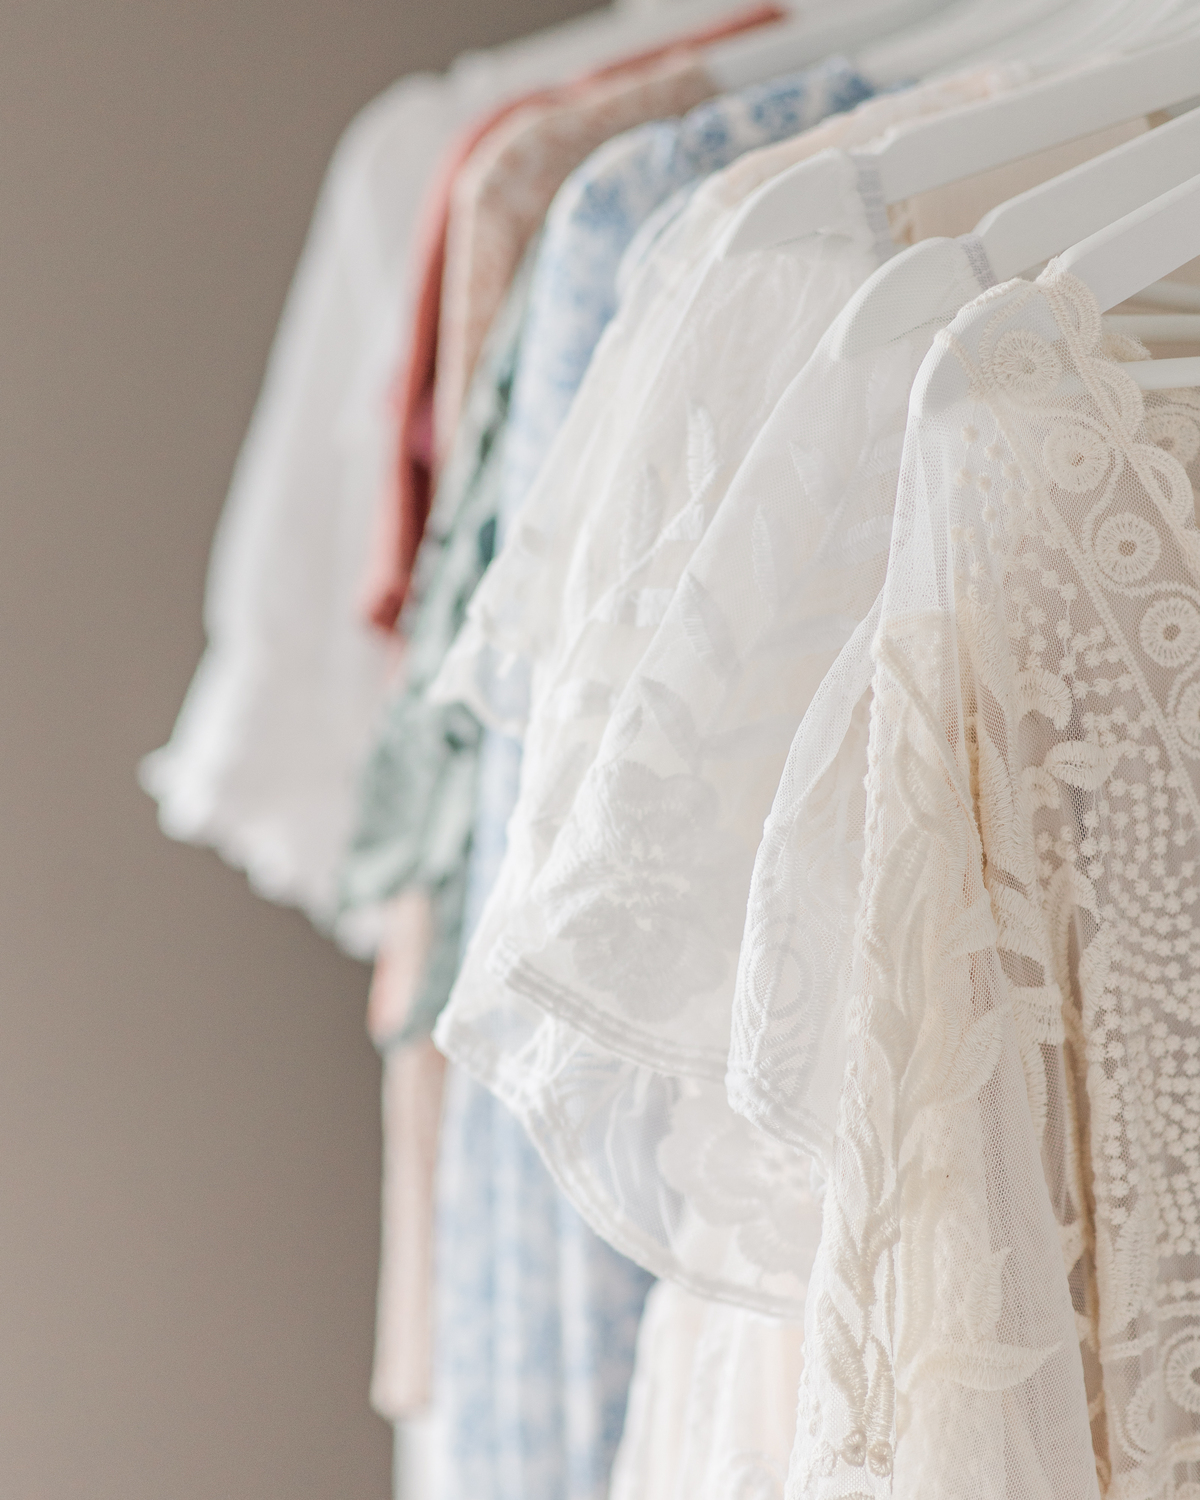 What is a Client Closet? DMV Family Photographer Christina Tundo Photography shares about her client closet for families